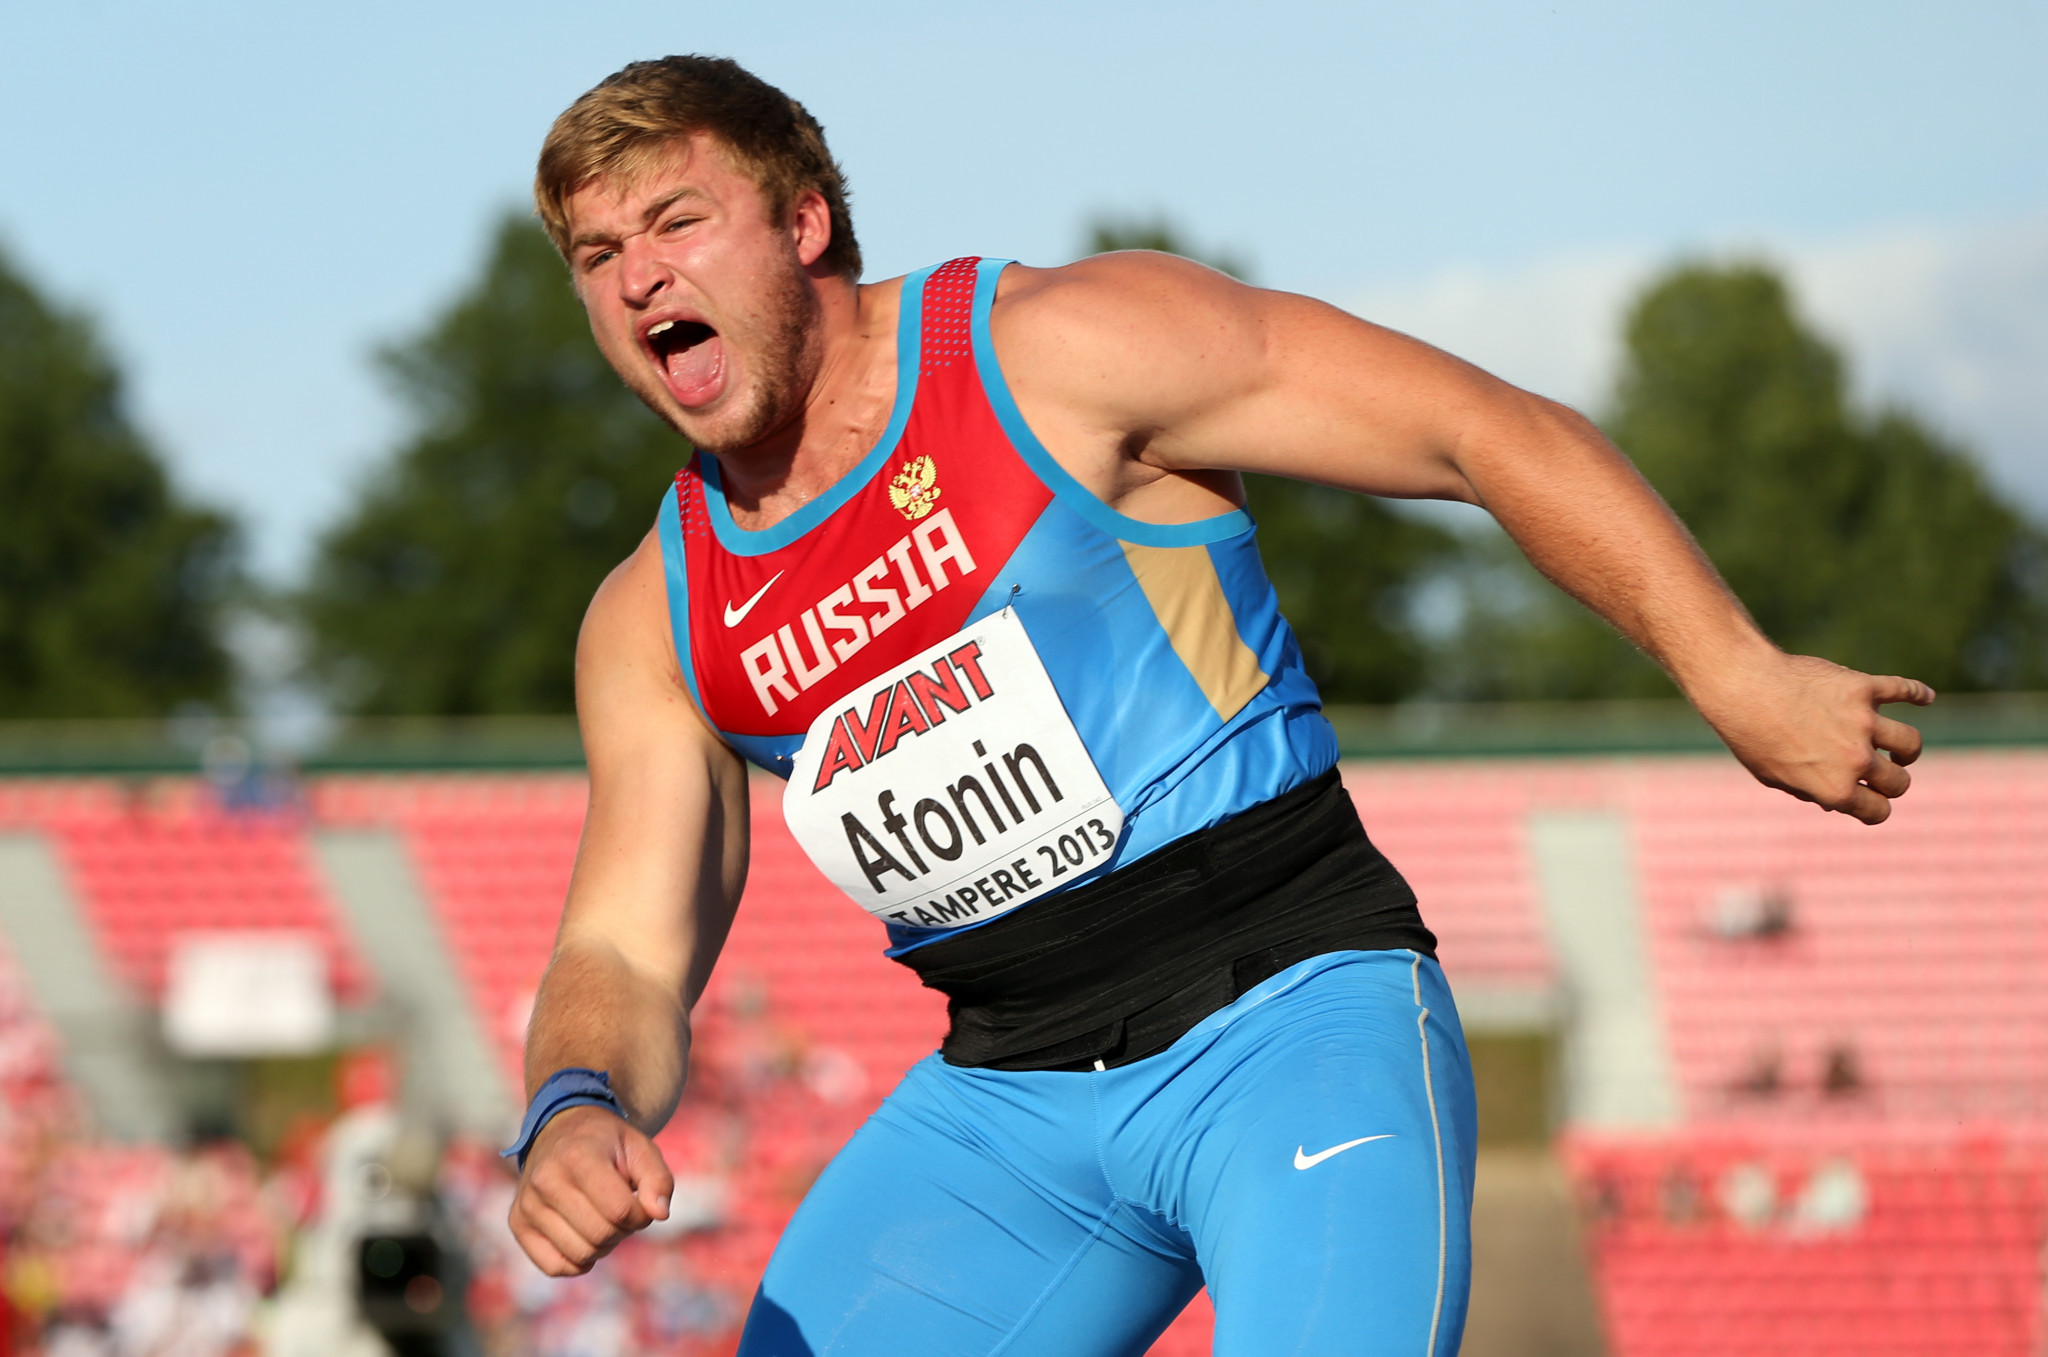 Maksim Afonin was granted ANA status by the IAAF yesterday ©Getty Images